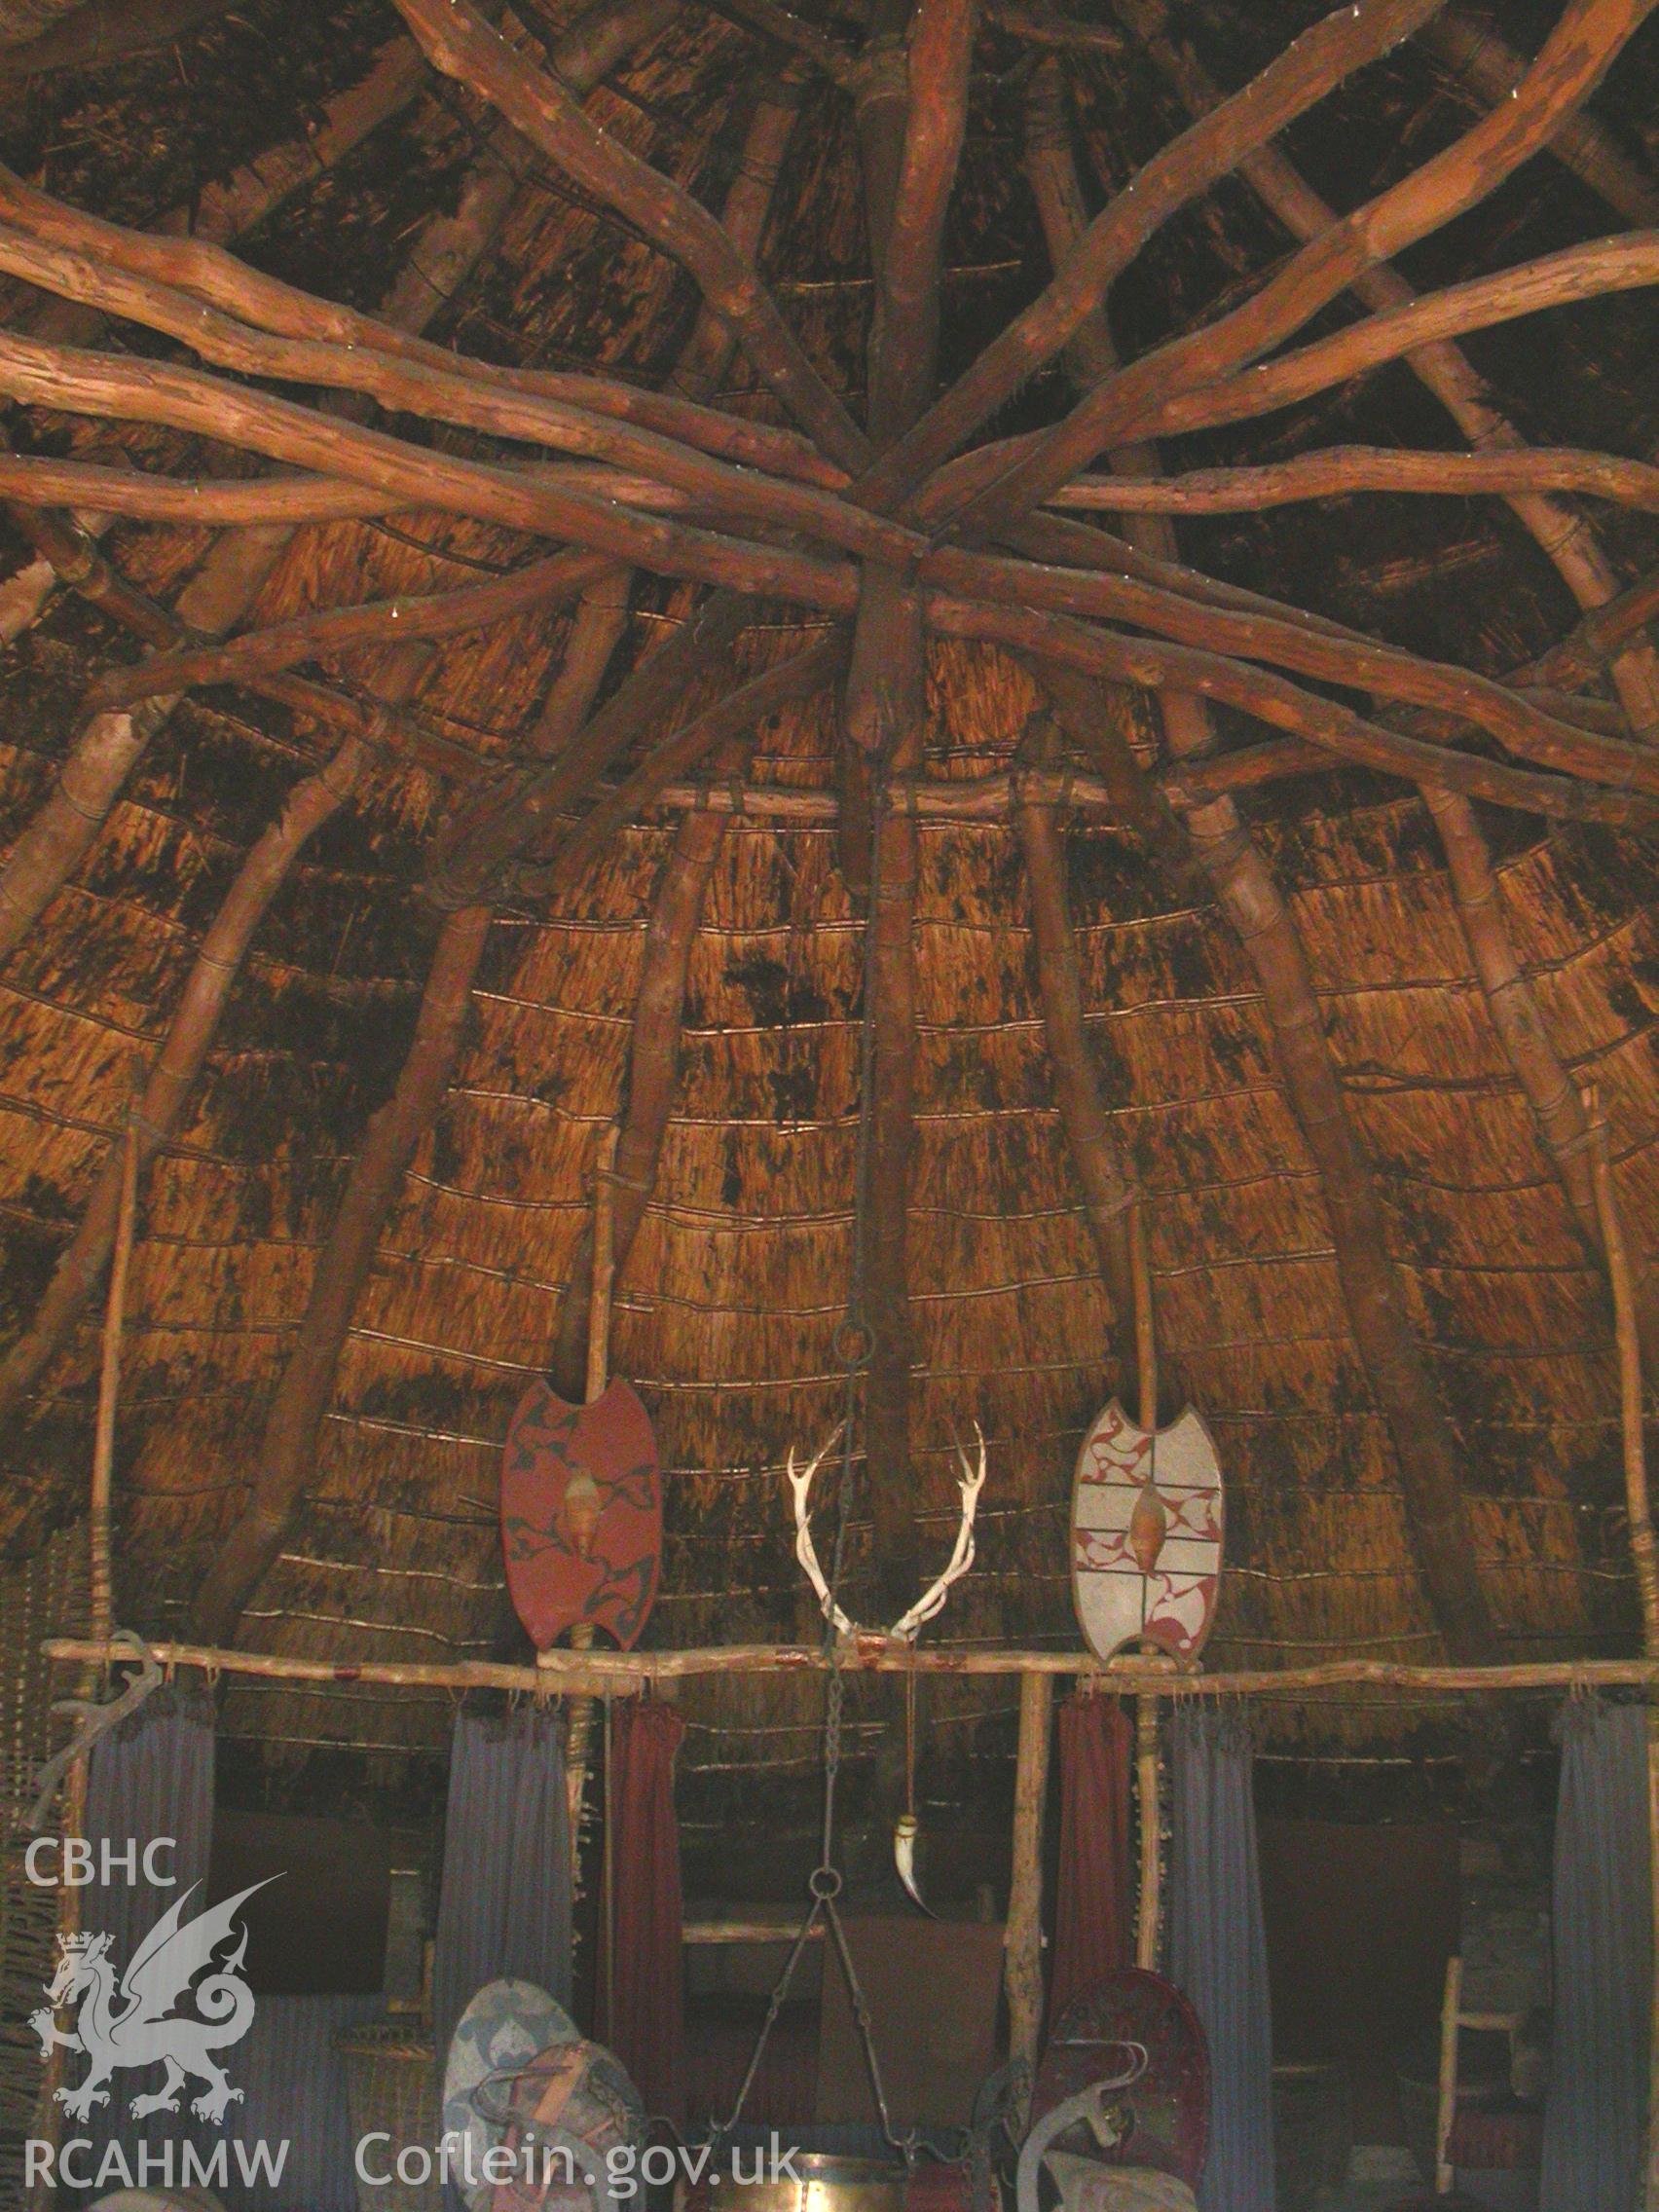 Interior of Chieftian's House showing roof structure and beds.